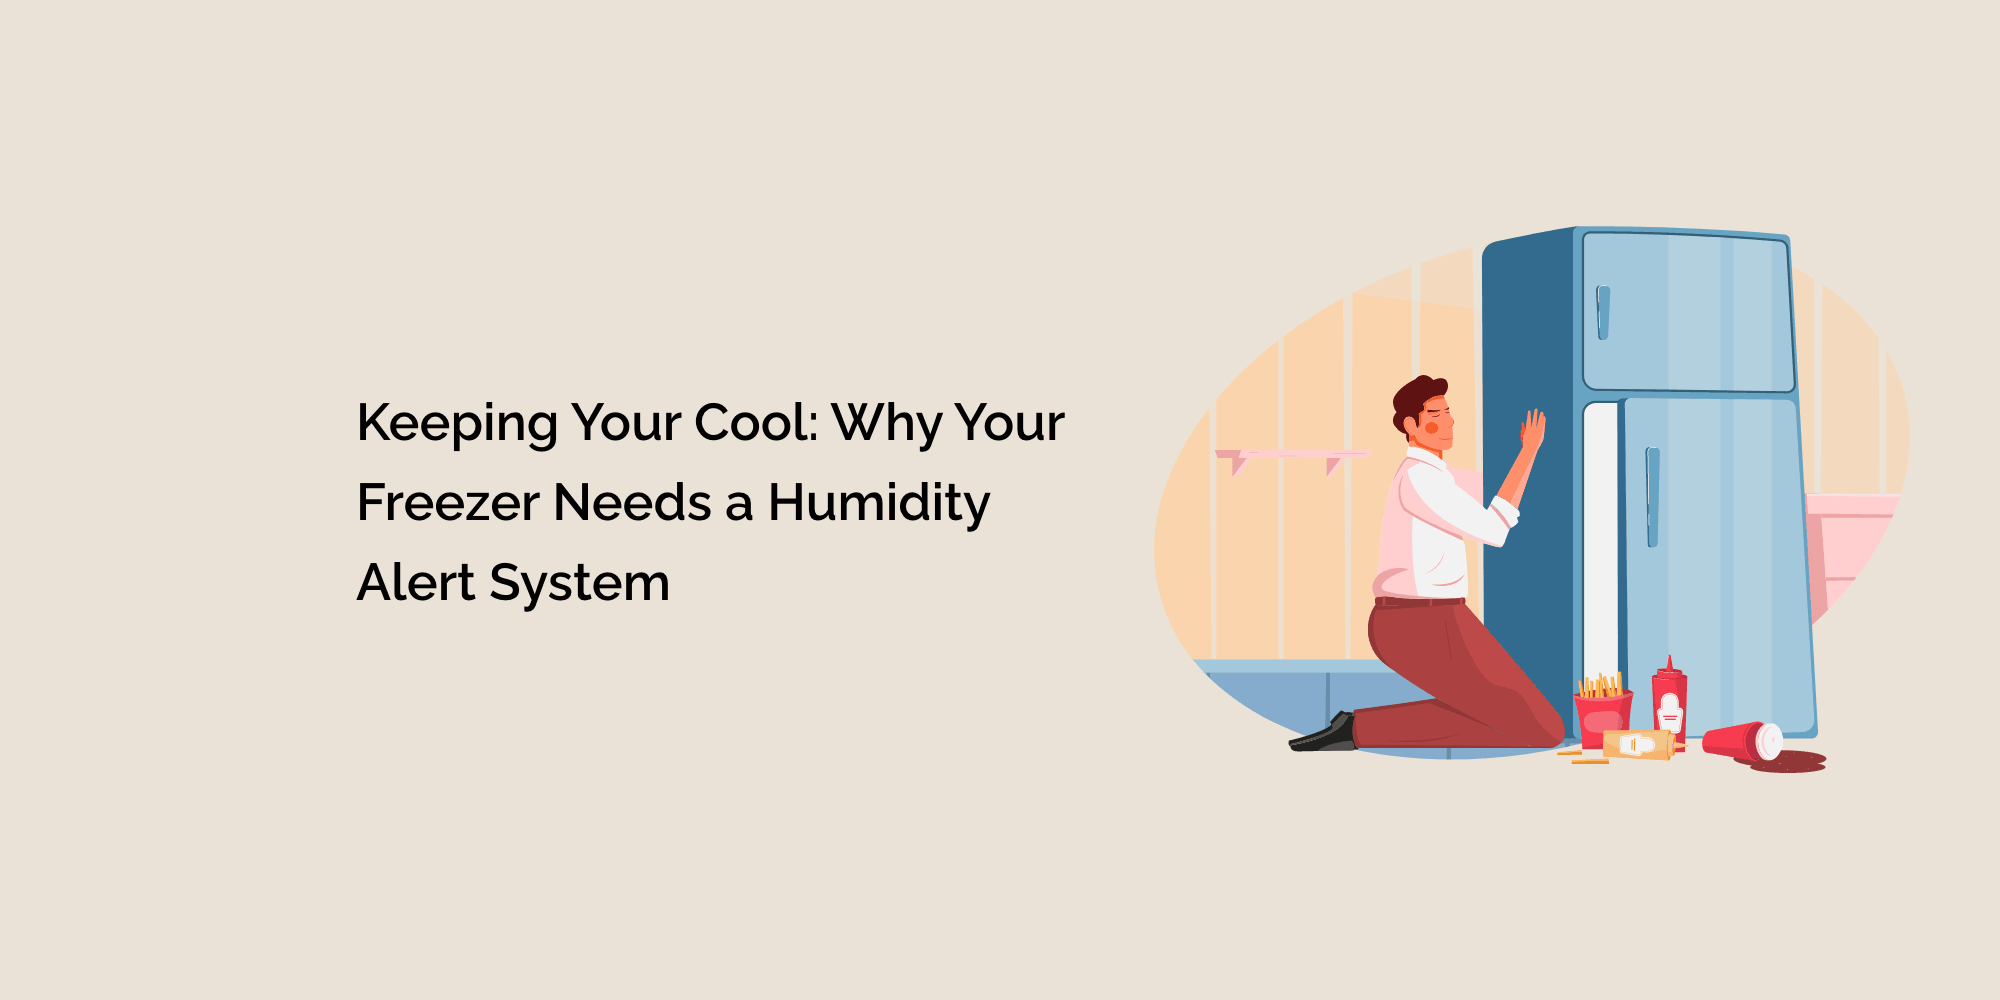 Keeping Your Cool: Why Your Freezer Needs a Humidity Alert System